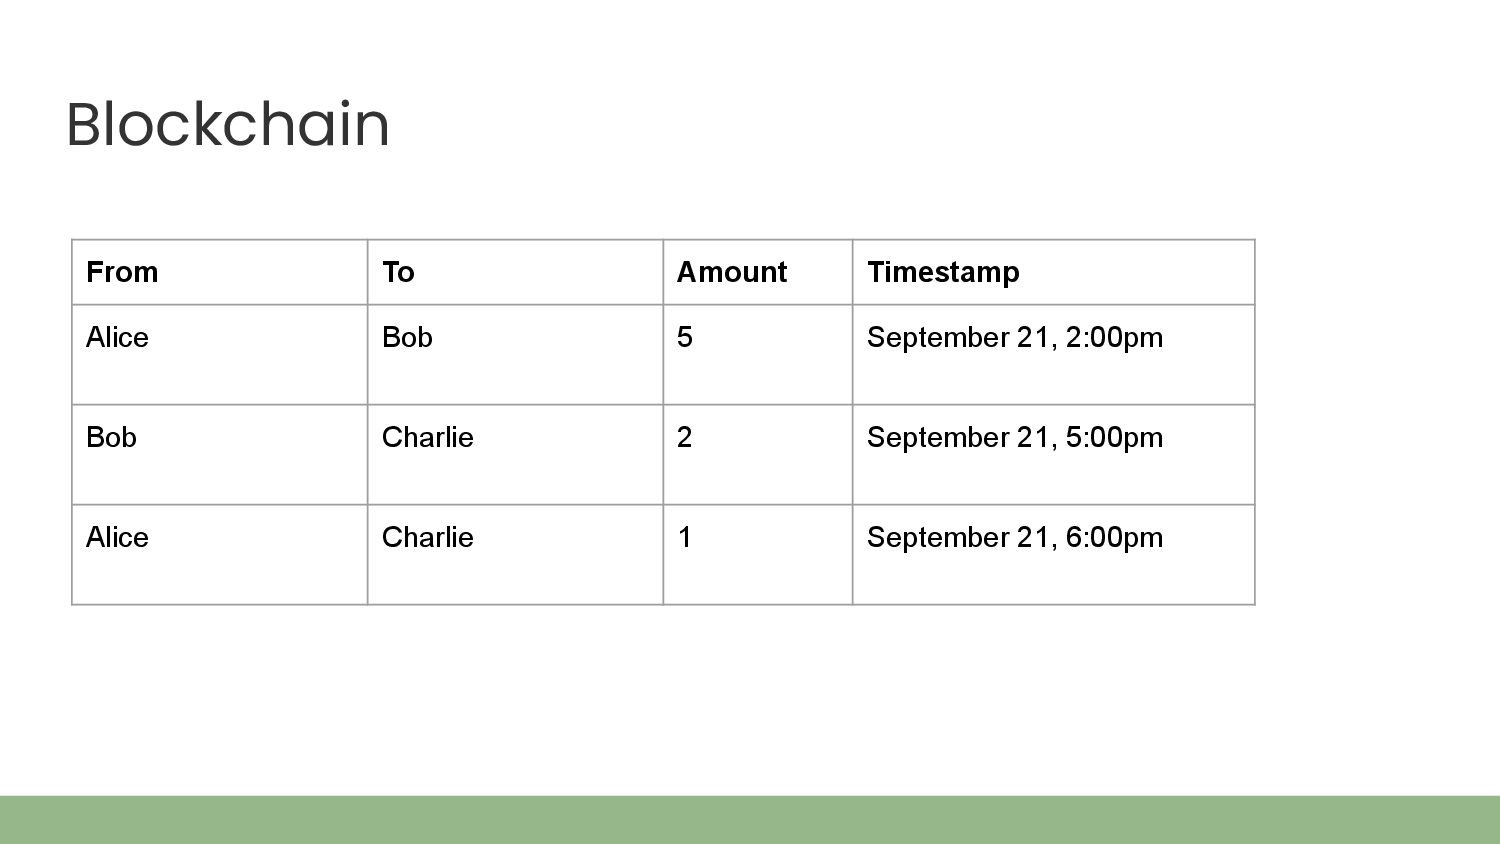 Title: Blockchain. Table shows three transactions: 5 tokens from Alice to Bob, timestamped September 21, 2:00pm. 2 tokens from Bob to Charlie, timestamped September 21, 5:00pm. 1 token from Alice to Charlie, timestamped September 21, 6:00pm.